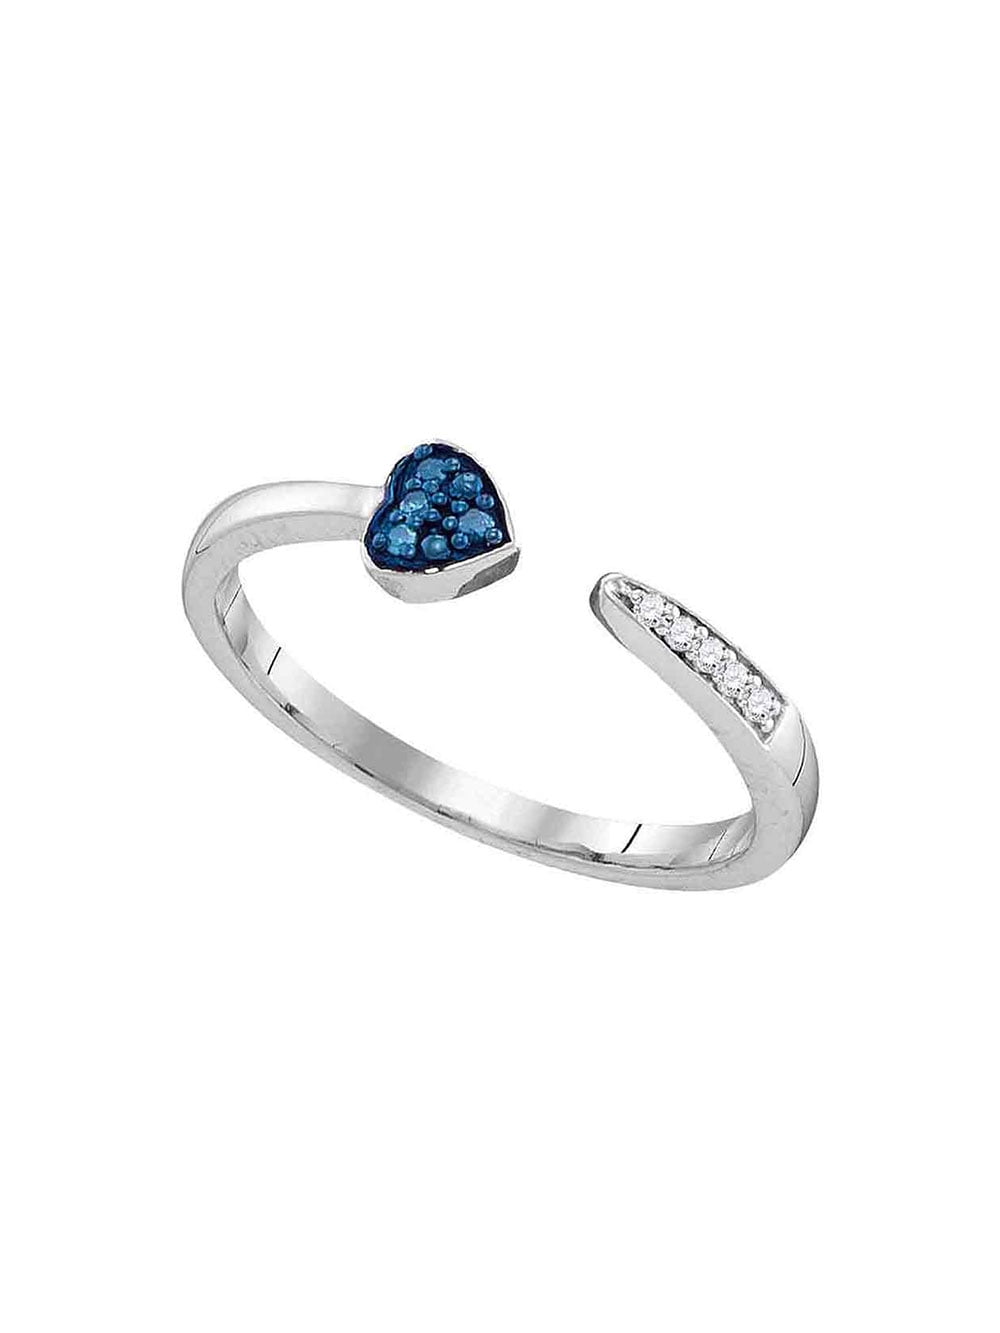 Jewels By Lux Sterling Silver Womens Round Blue Color Enhanced Diamond Bisected Heart Band 1/20 Cttw In Pave Setting I2-I3 clarity; Blue color